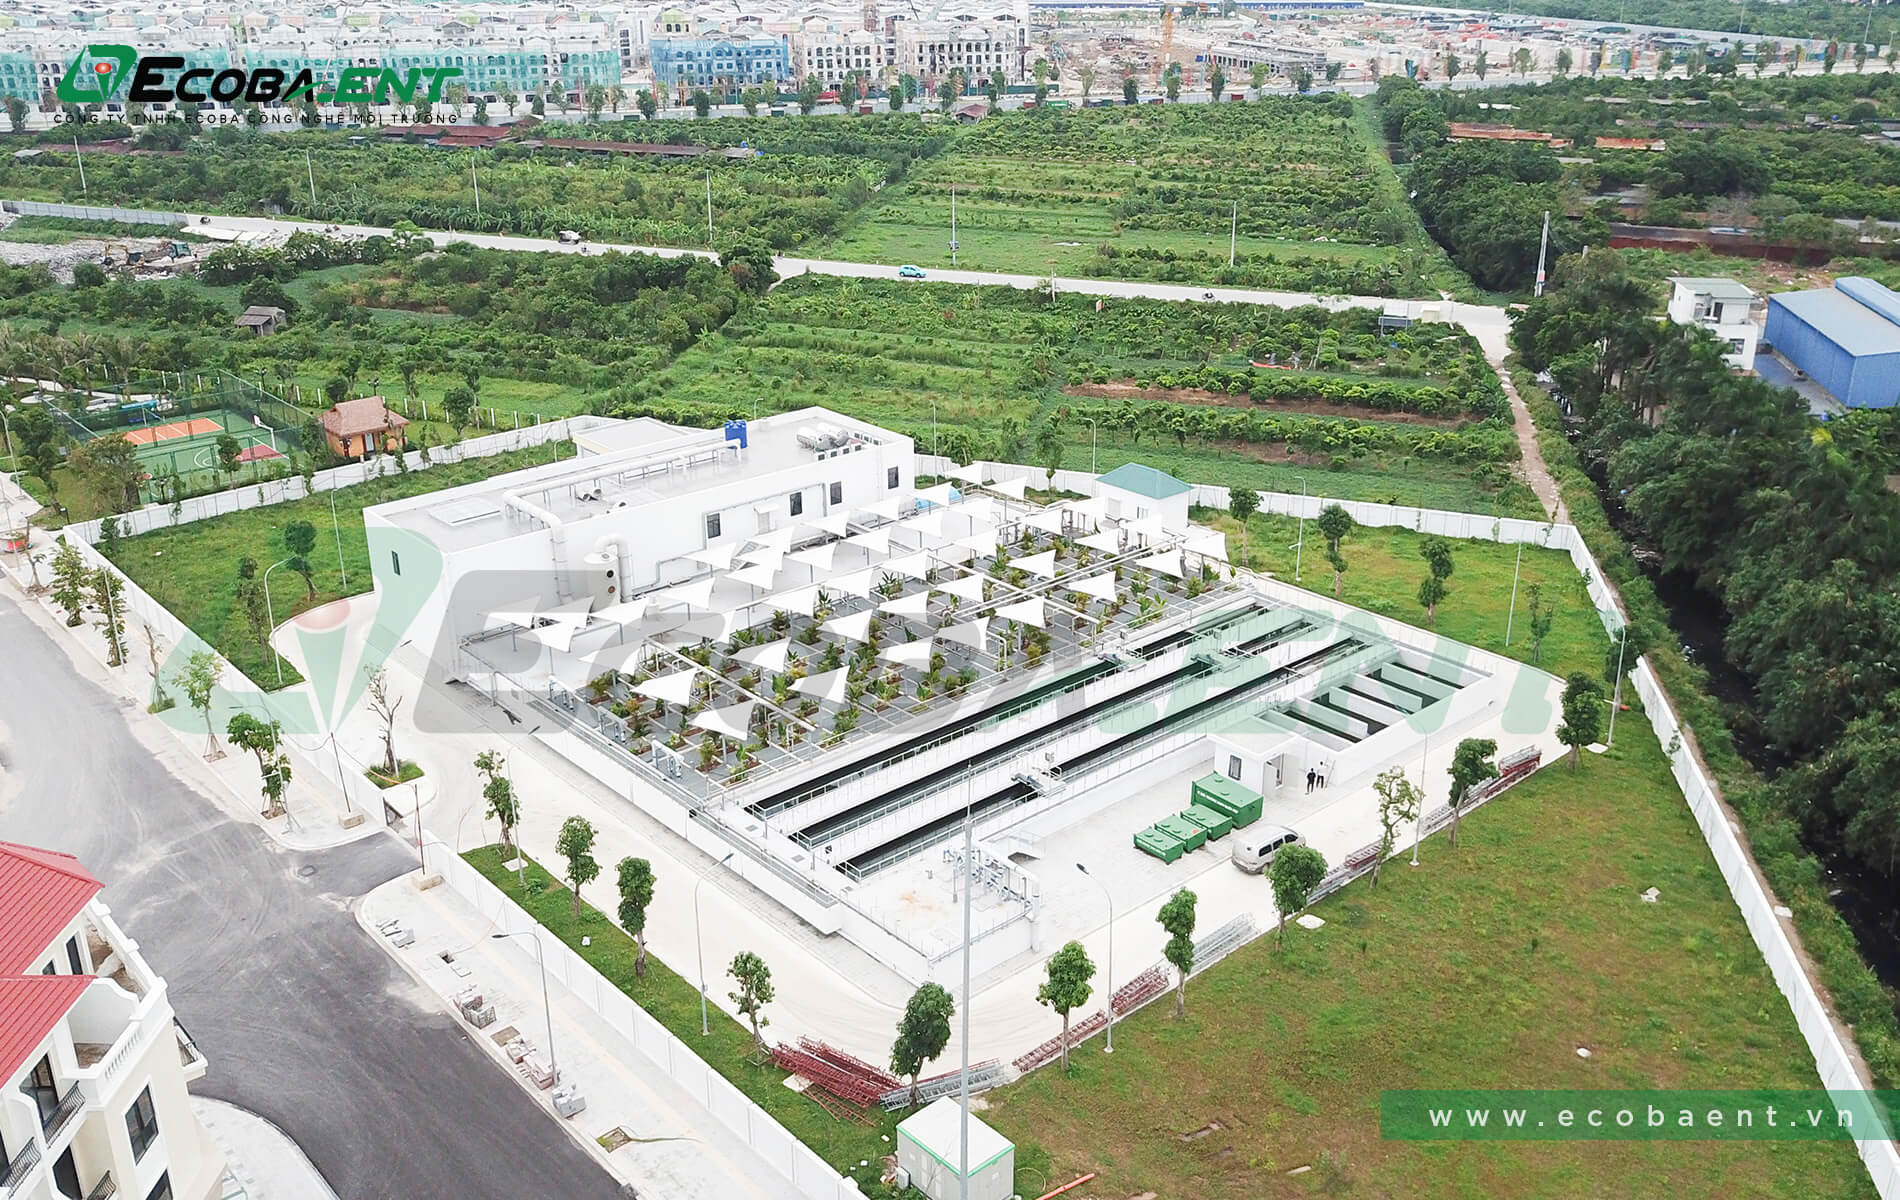 The municipal wastewater treatment plant for Vinhomes Ocean Park - The Empire urban area